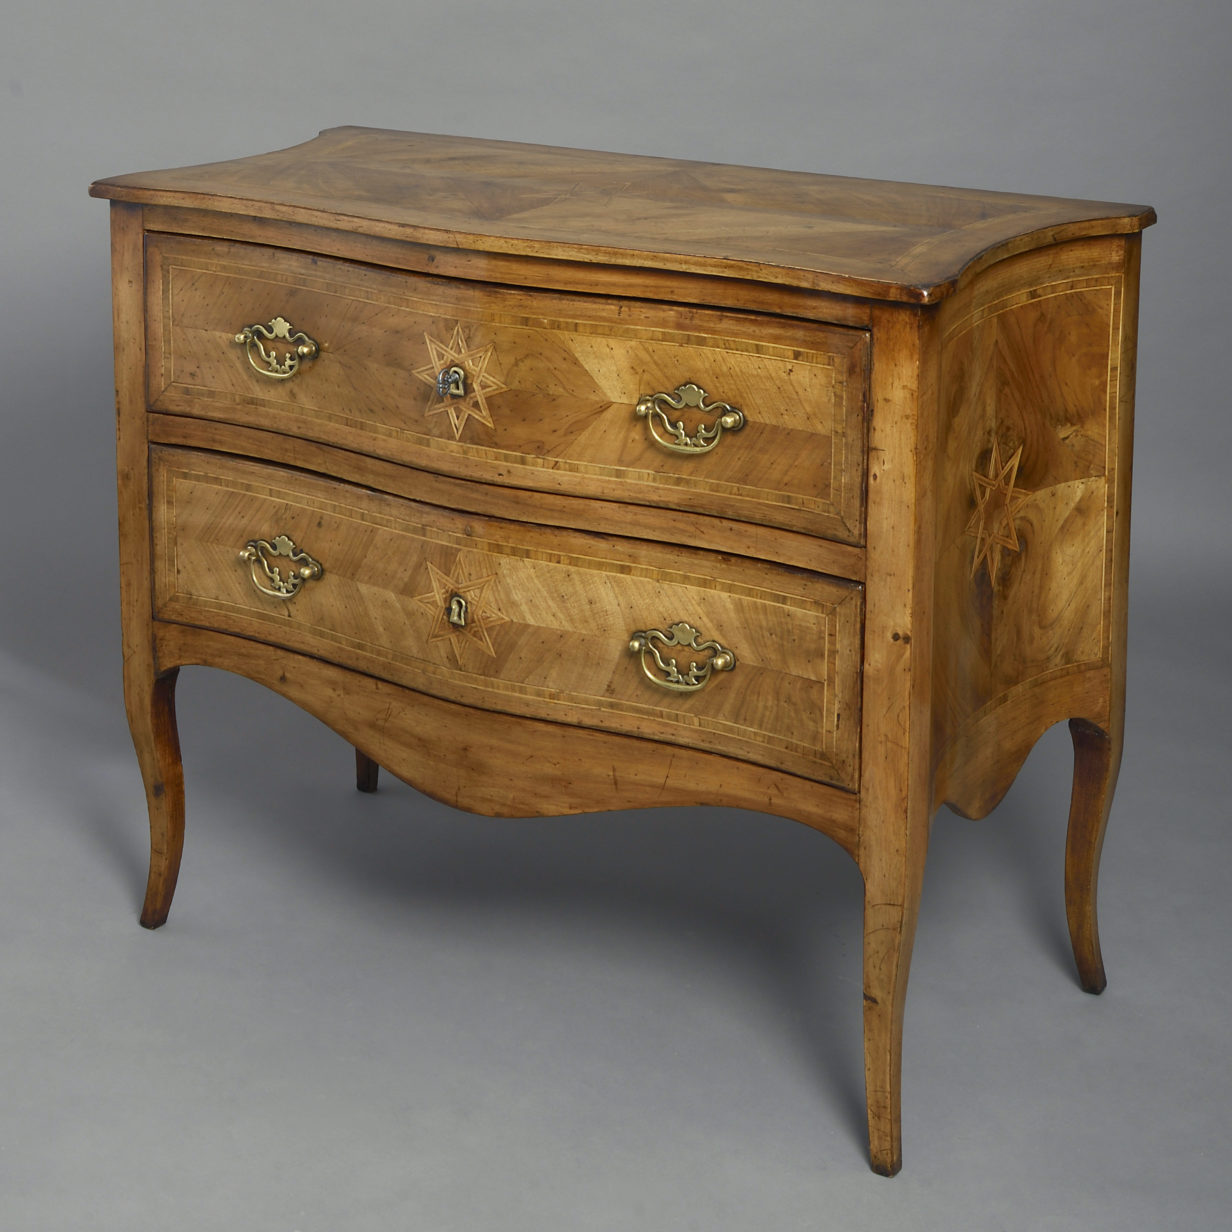 A Pair of 18th Century Serpentine Inlaid Walnut Commodes